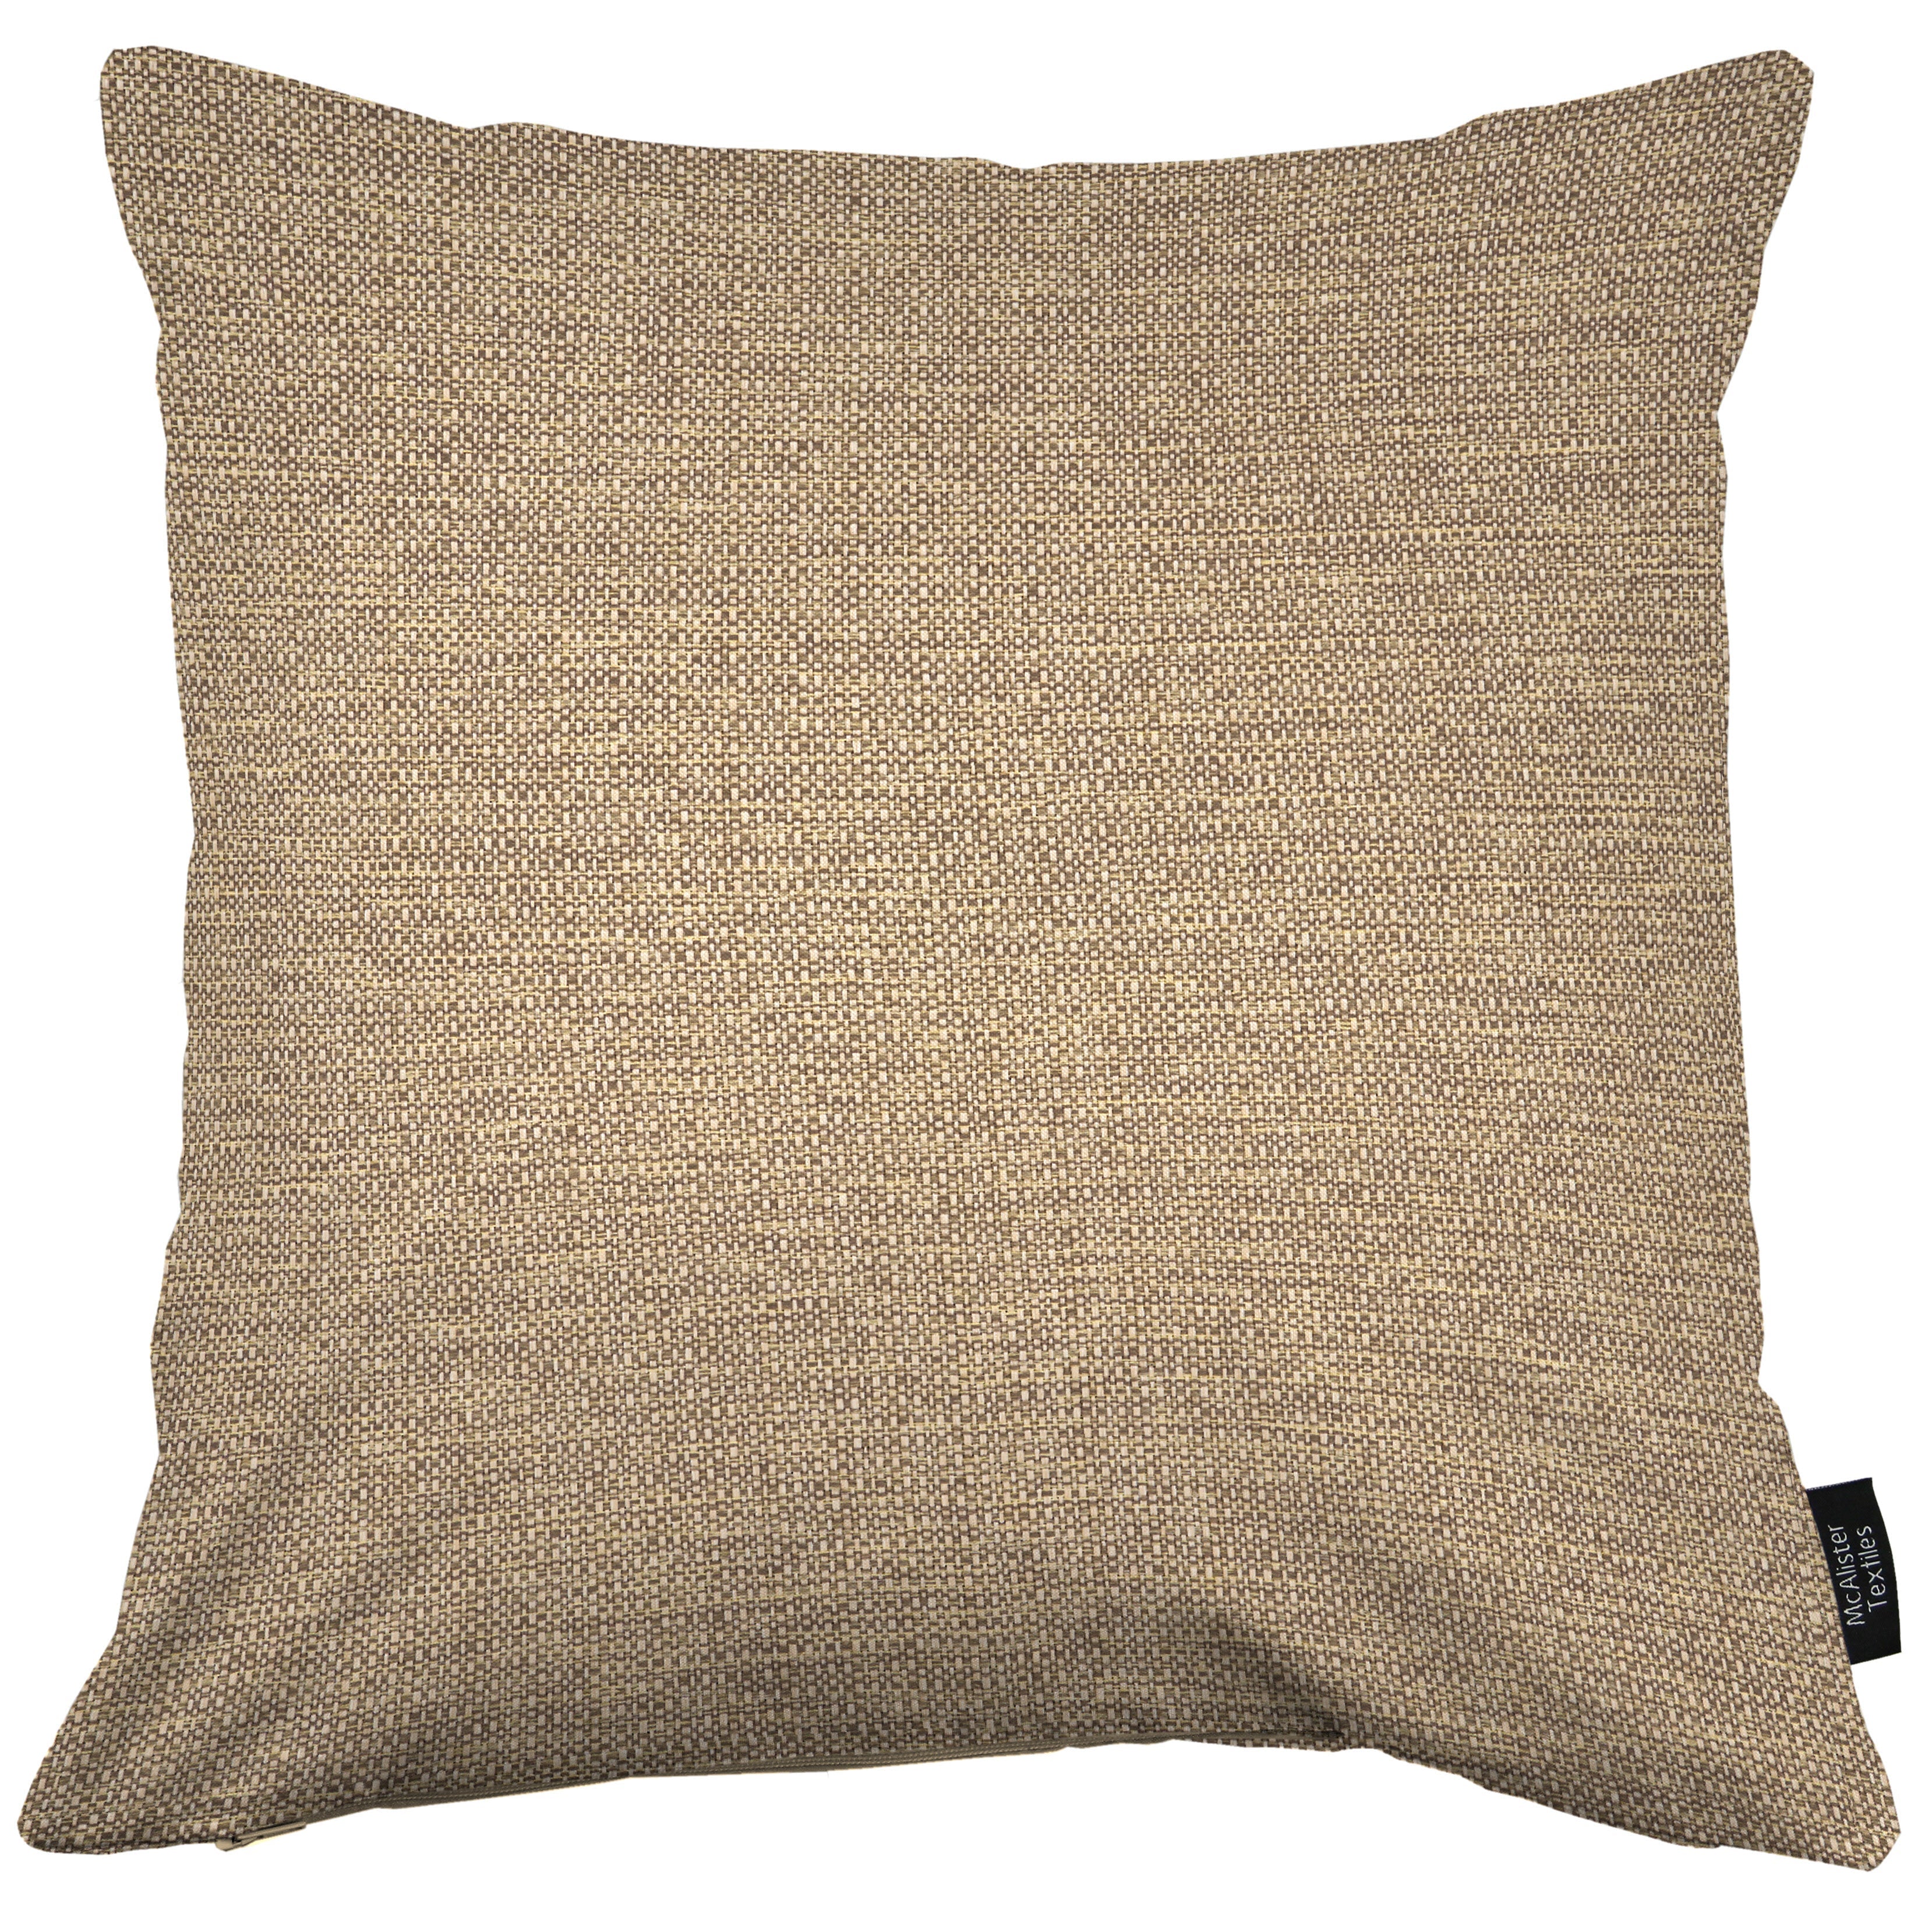 McAlister Textiles Roma Mocha Woven Cushion Cushions and Covers 